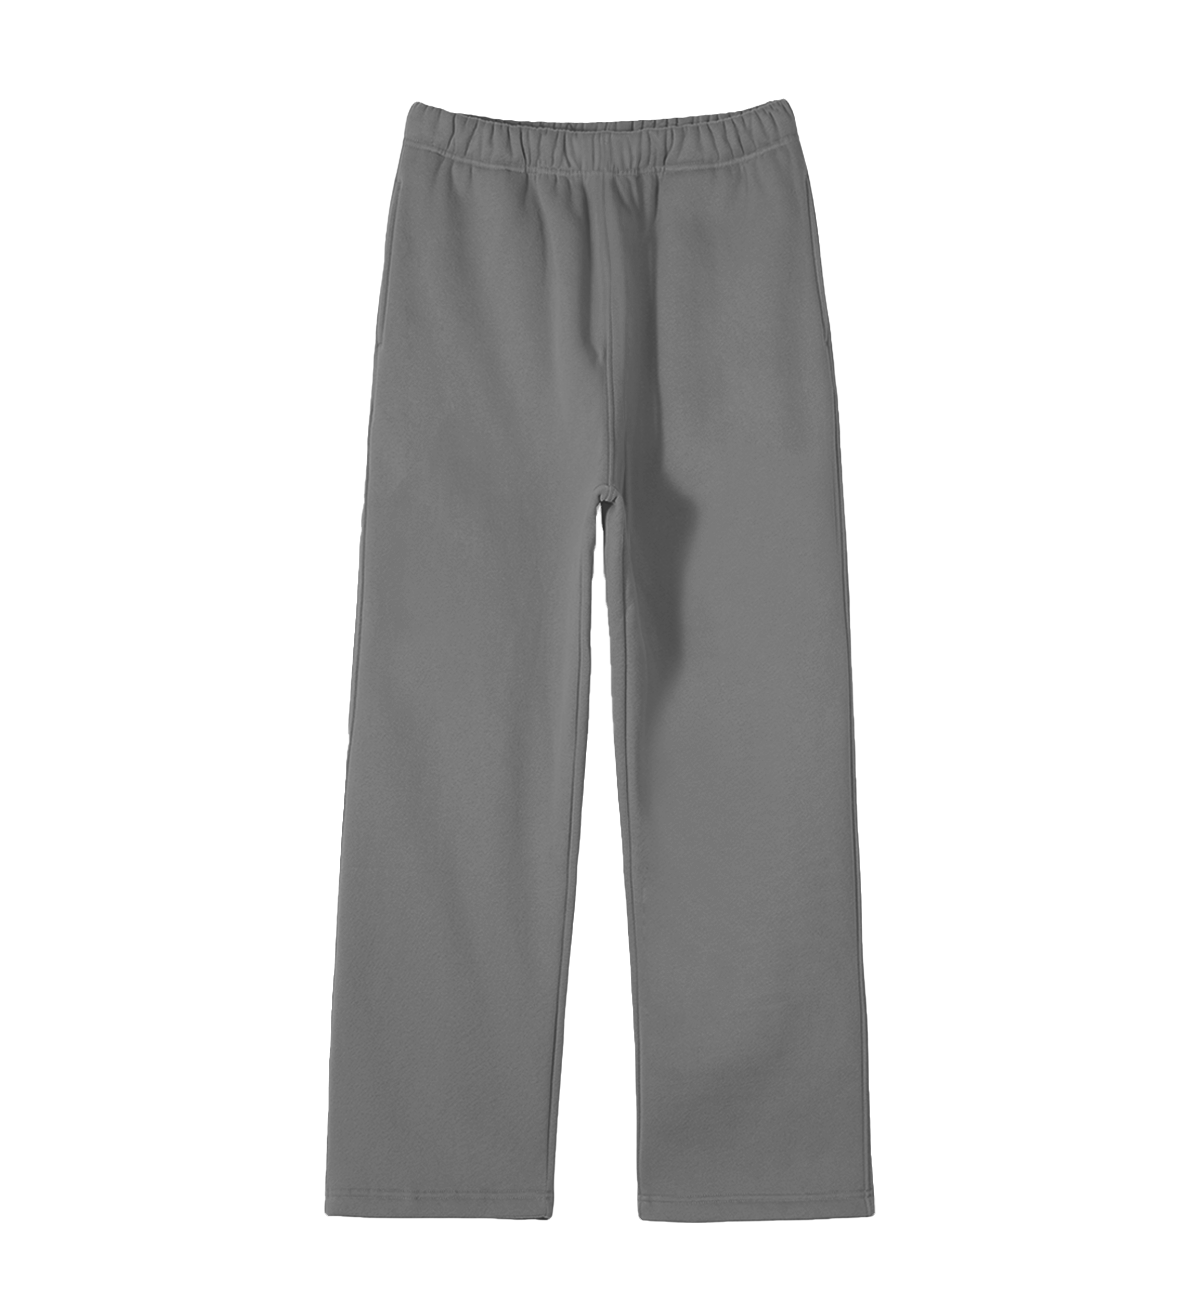 GREY LOOSE-FIT SWEATPANTS – THE BLANKS